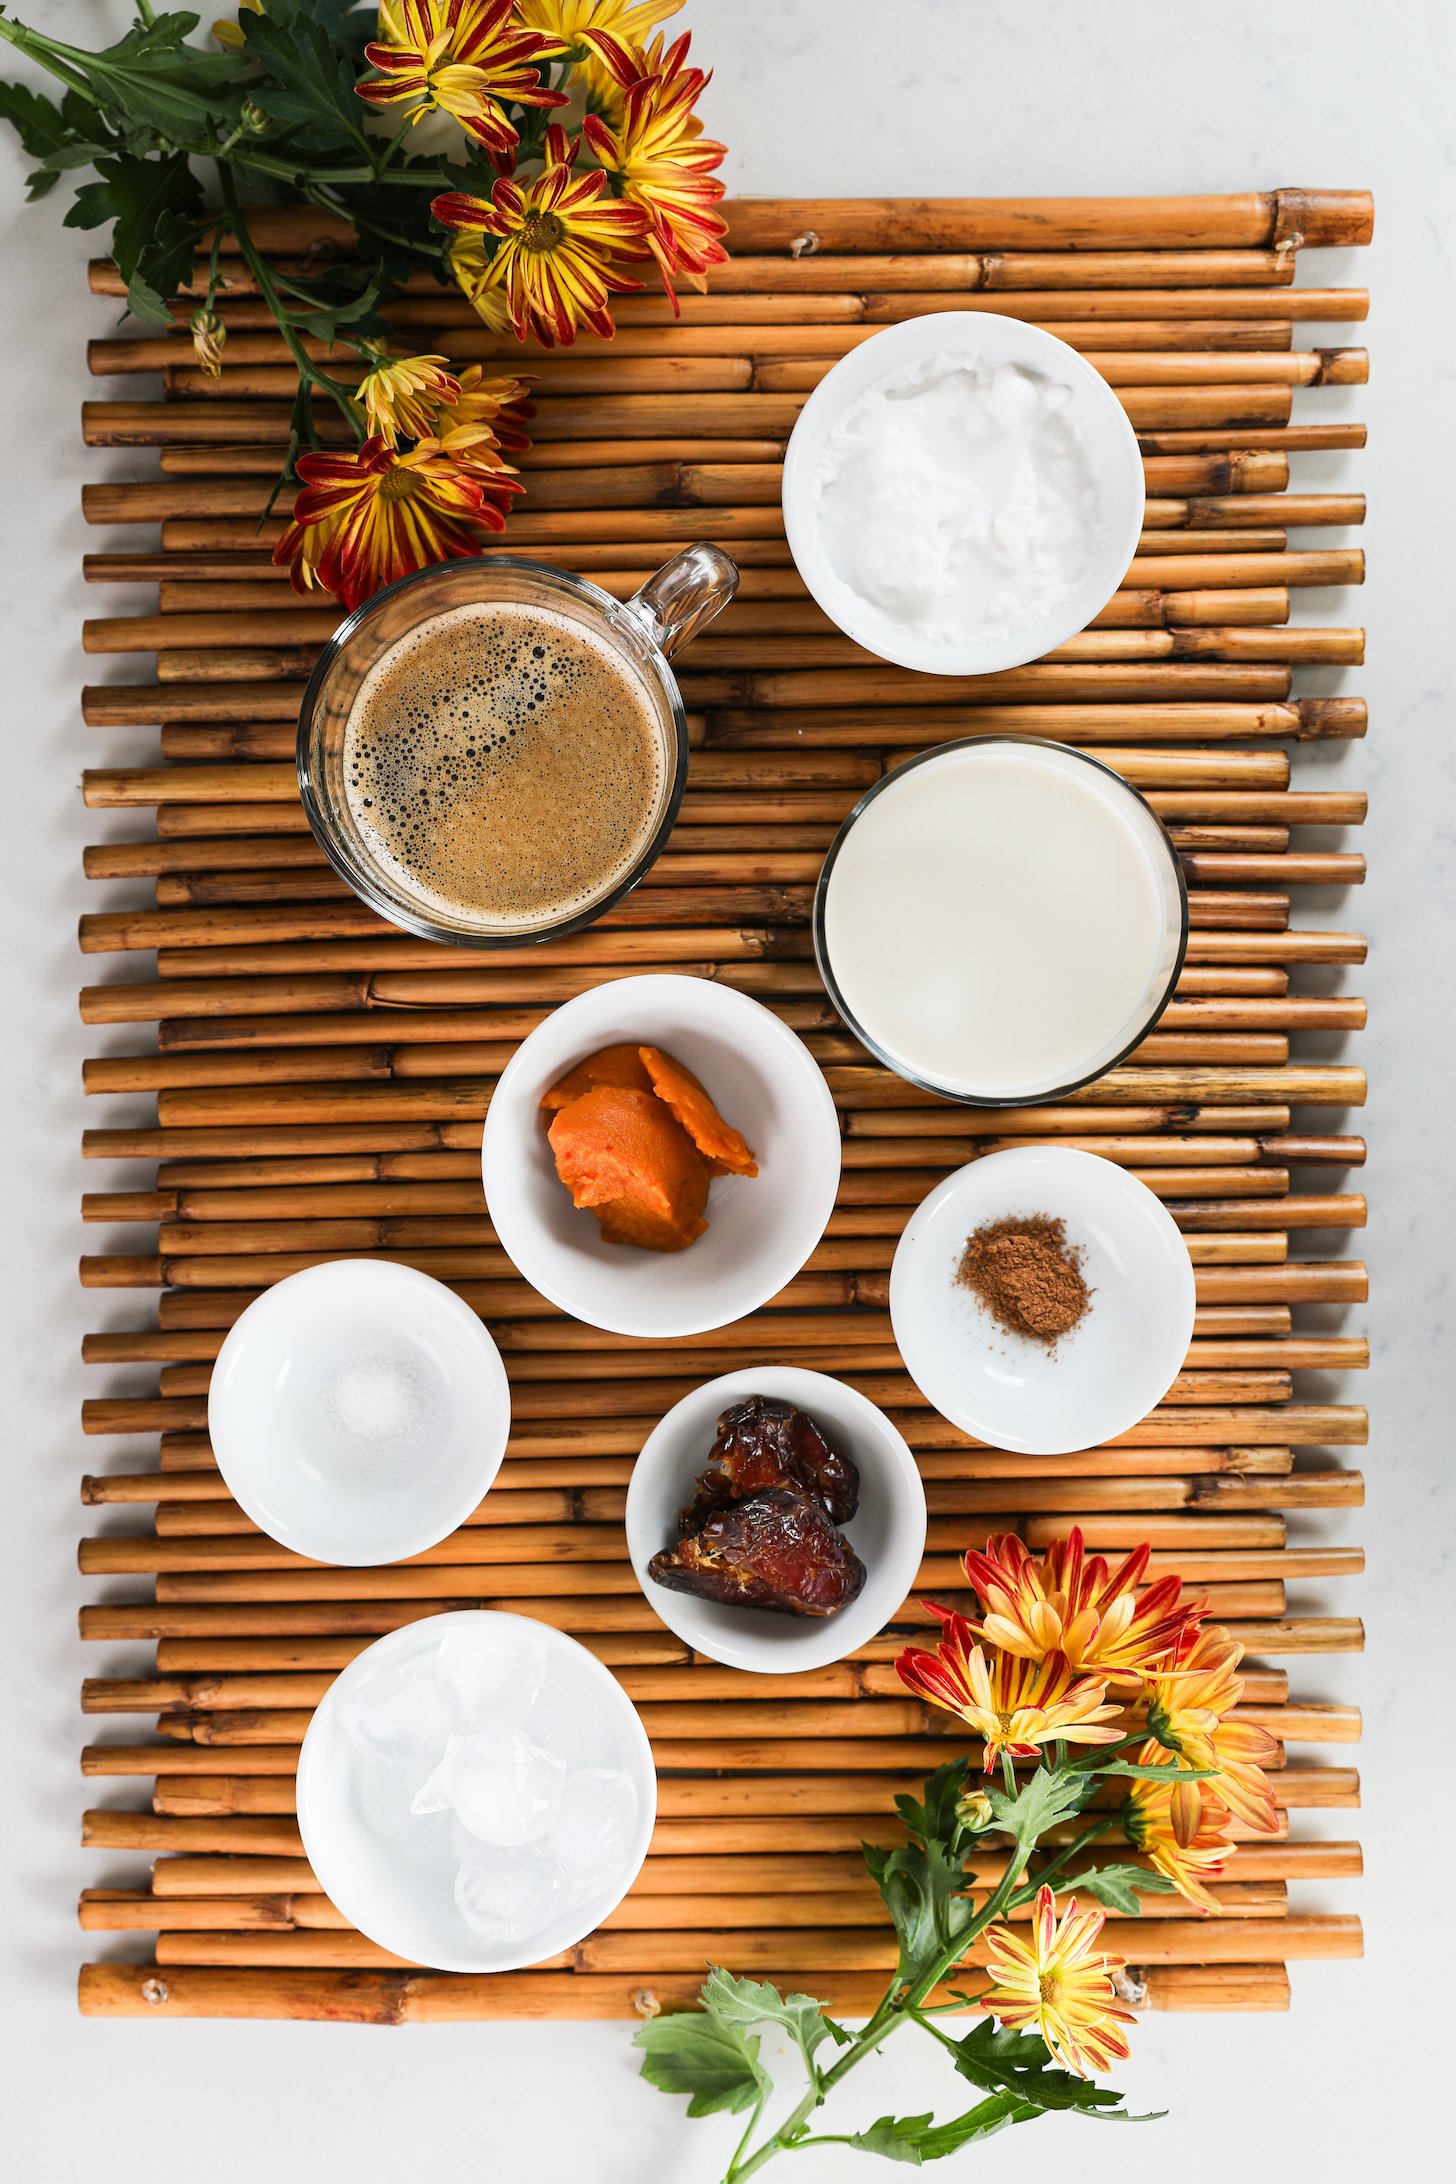 A selection of food ingredients, such as milk, coffee, pumpkin puree, dates, and spices, neatly arranged on a bamboo place mat with nearby flowers.